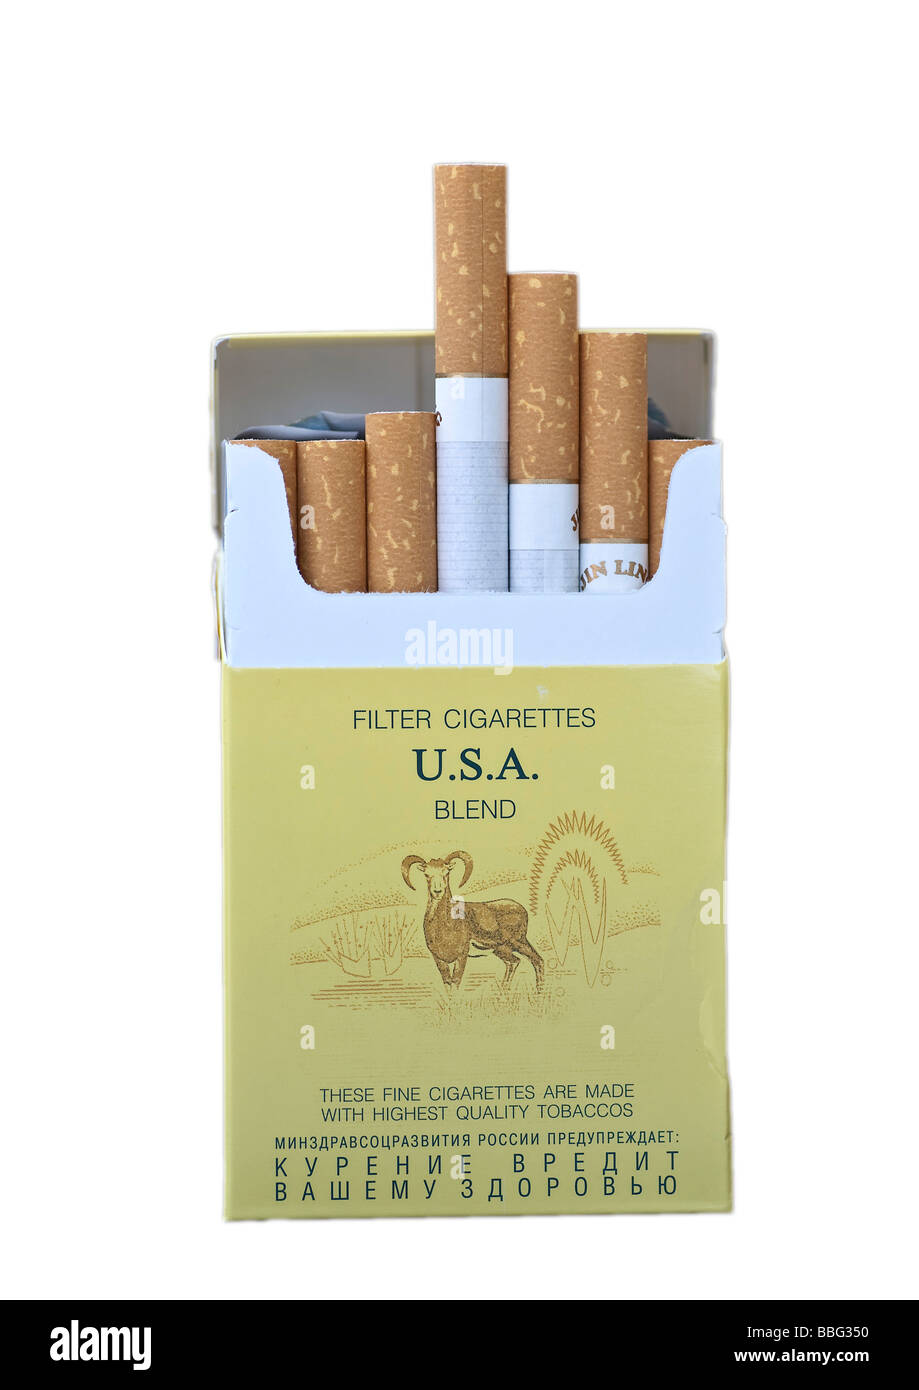 A pack of cigarettes, Jin Ling, cigarette brand most often smuggled from Russia to Germany Stock Photo